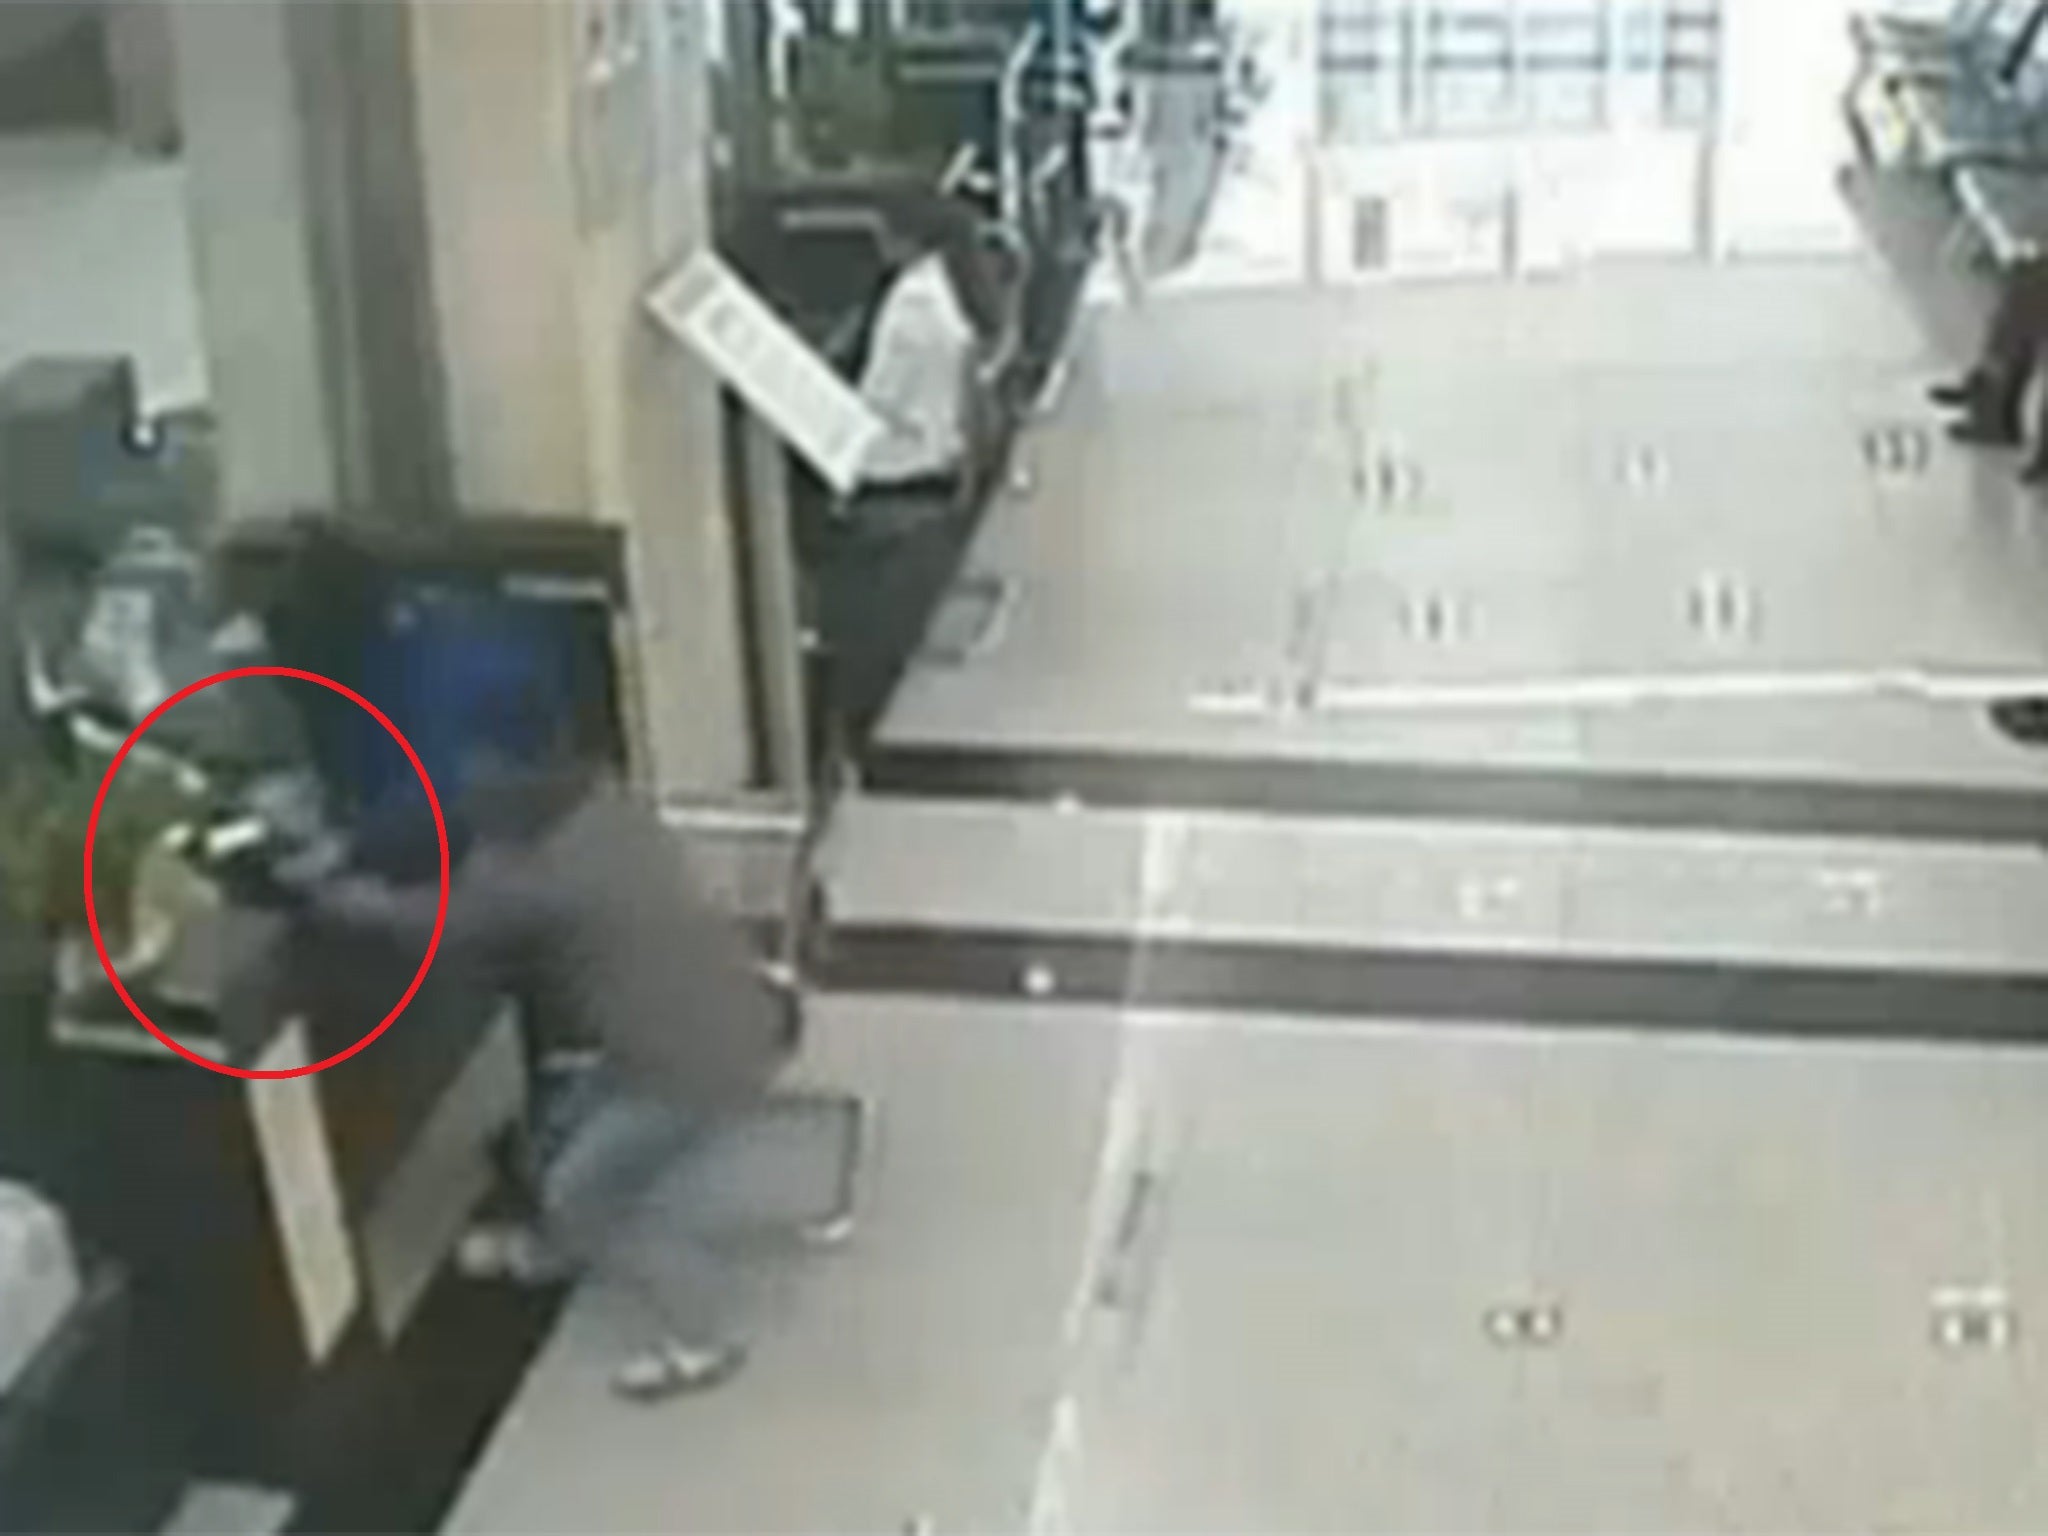 The moment the robber grabs the cash and handbag